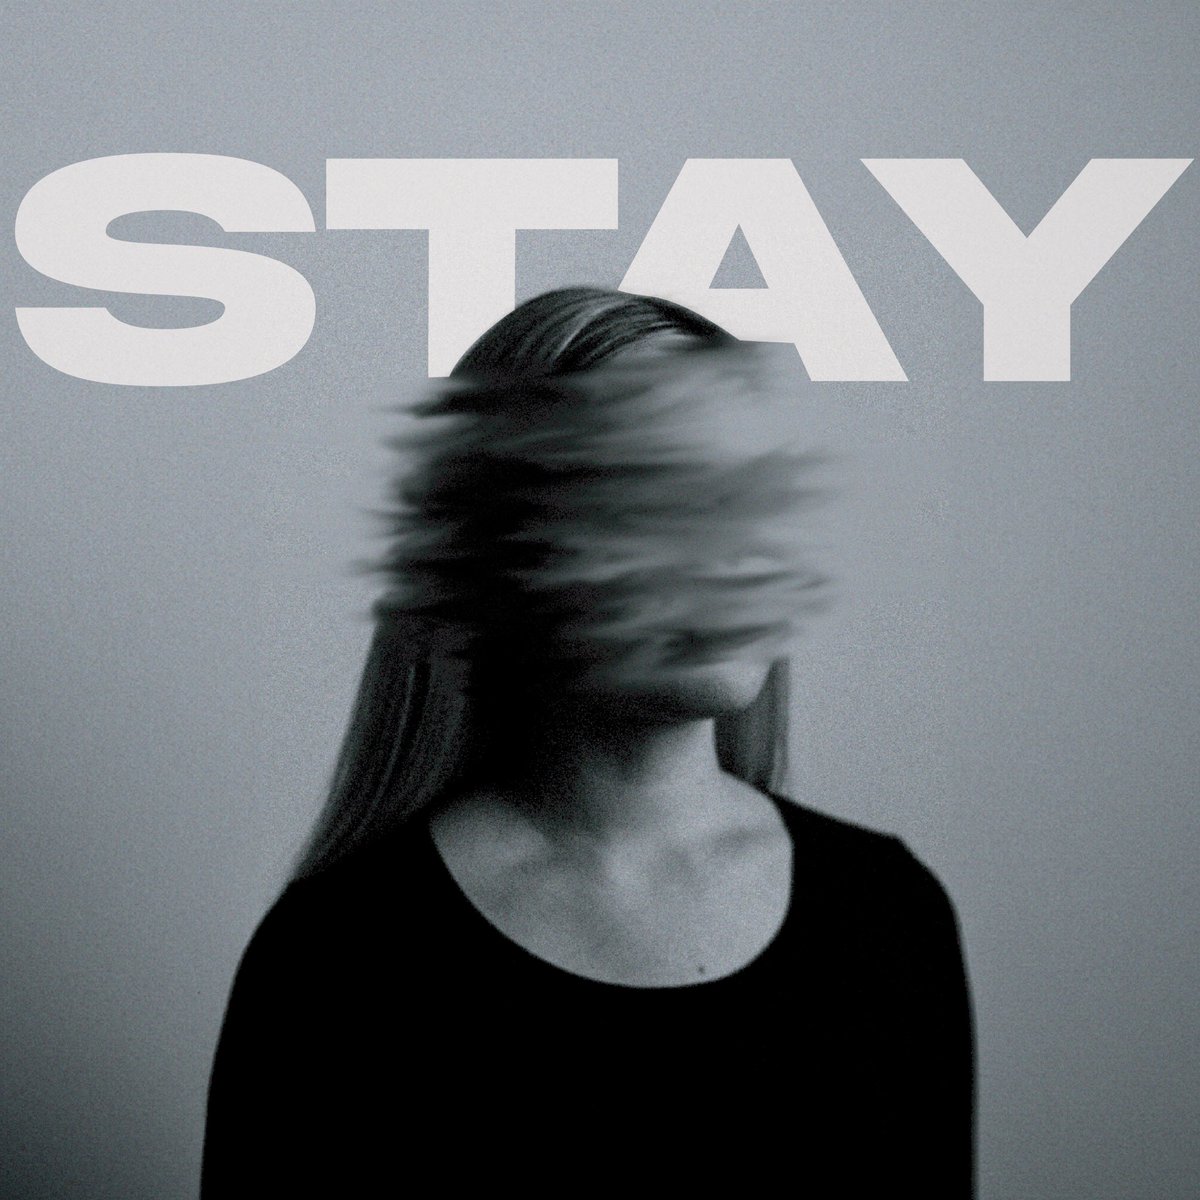 here to serve the loyalists. You just aren’t ready for this one!

STAY. 1 December. 

#newmusic #unsignedartist #songofthesummer #newrelease #stay